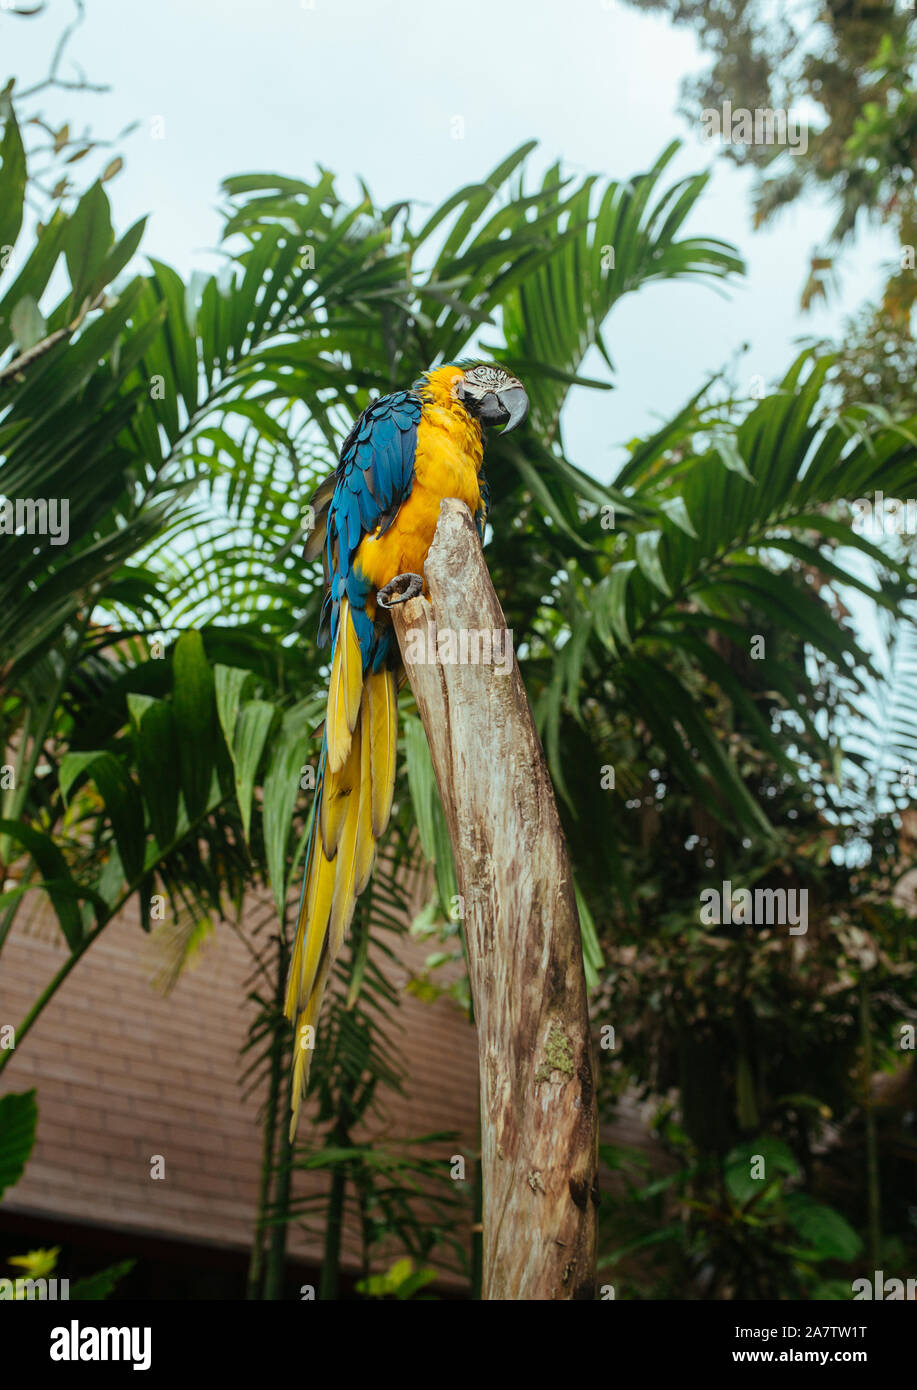 Blue Yellow Macaw Parrot sitting on a branch in a tropical park Stock Photo